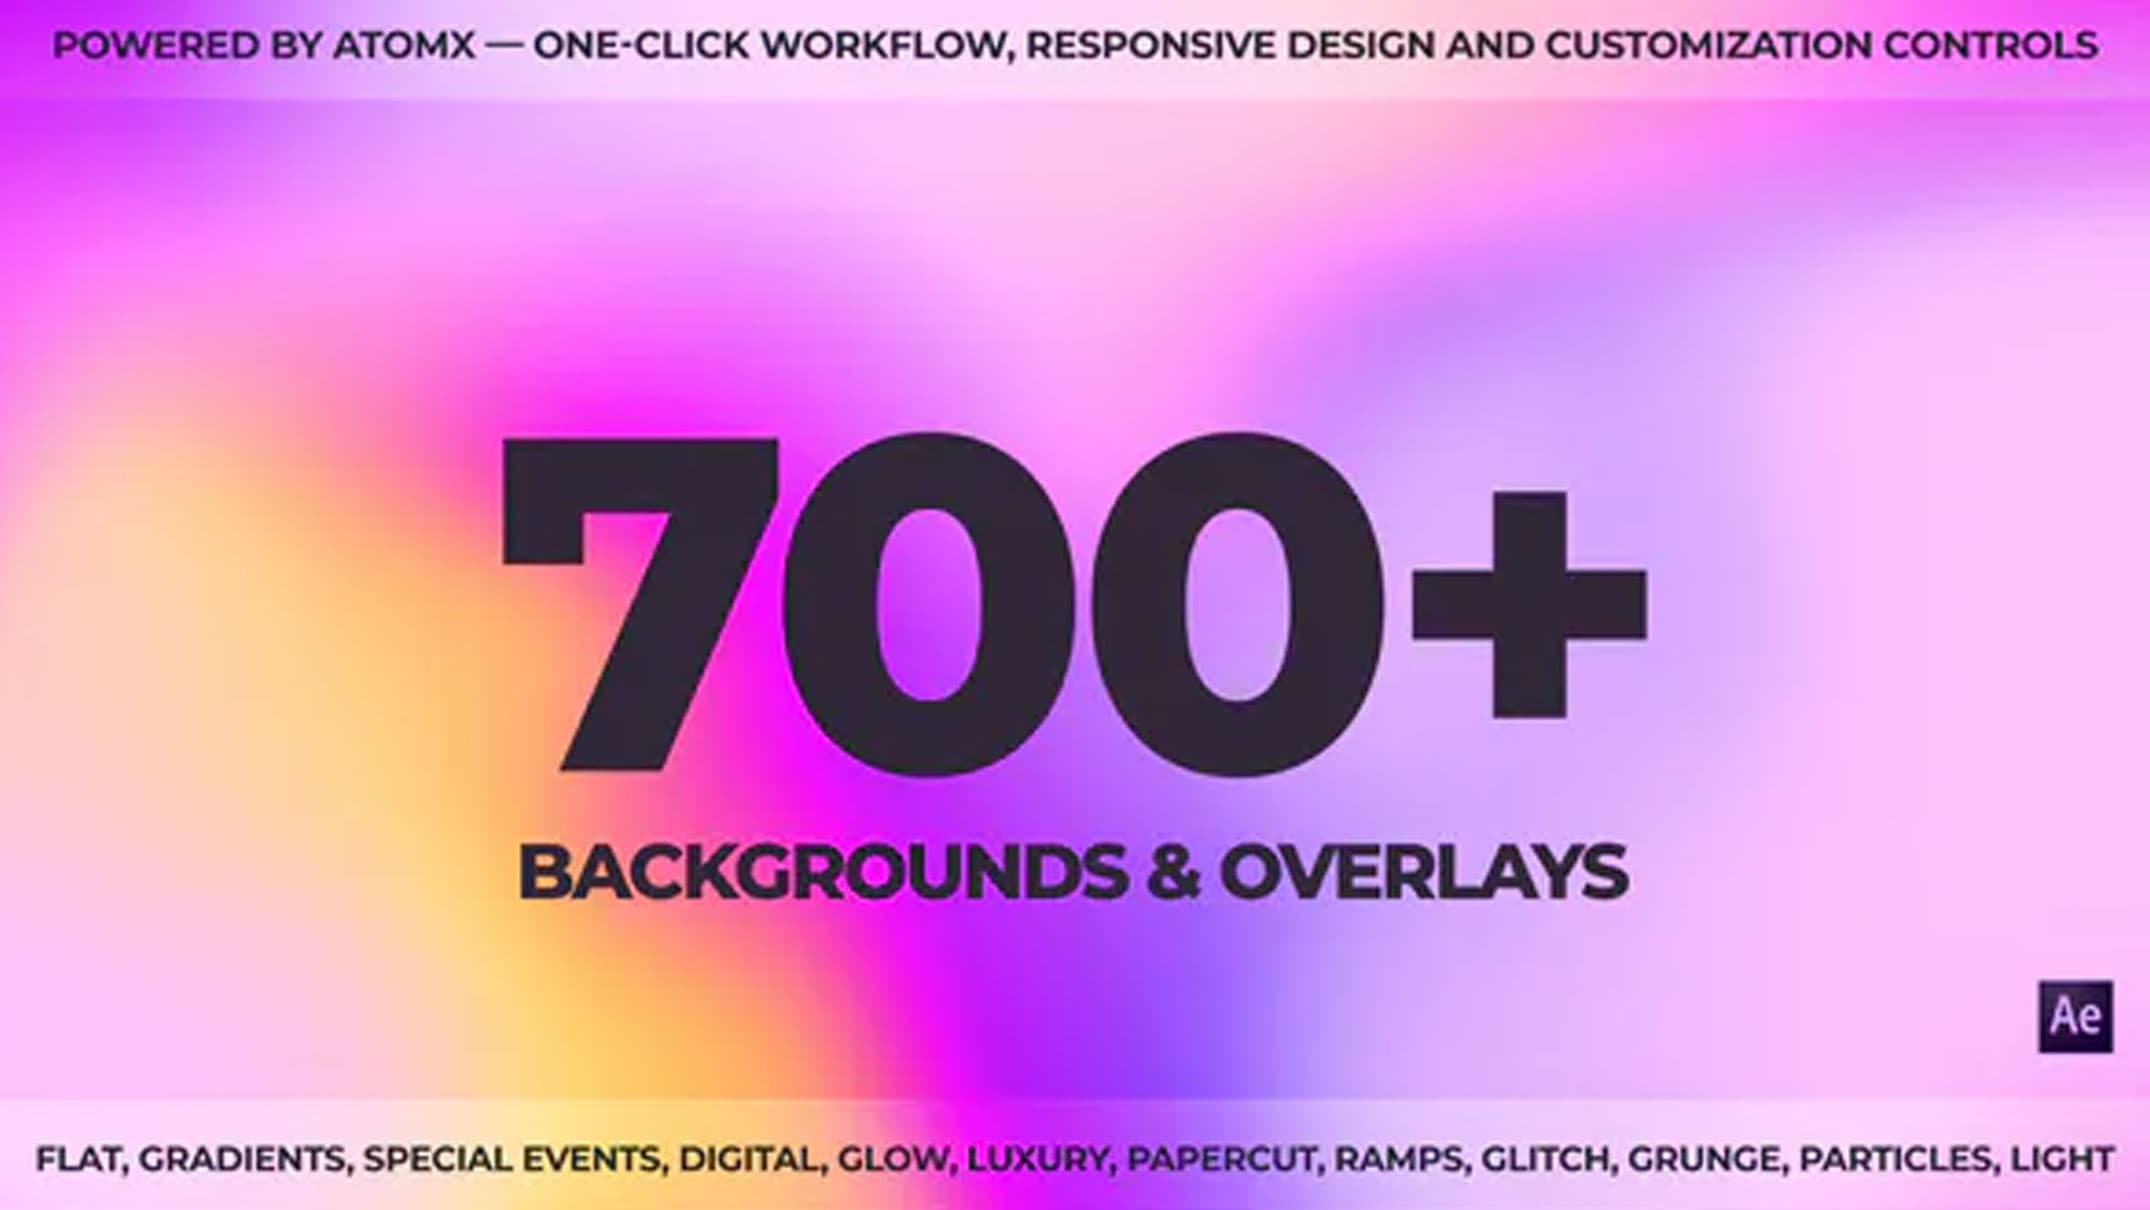 Videohive AtomX Backgrounds Pack 32623942 Free Download Epzilla.com